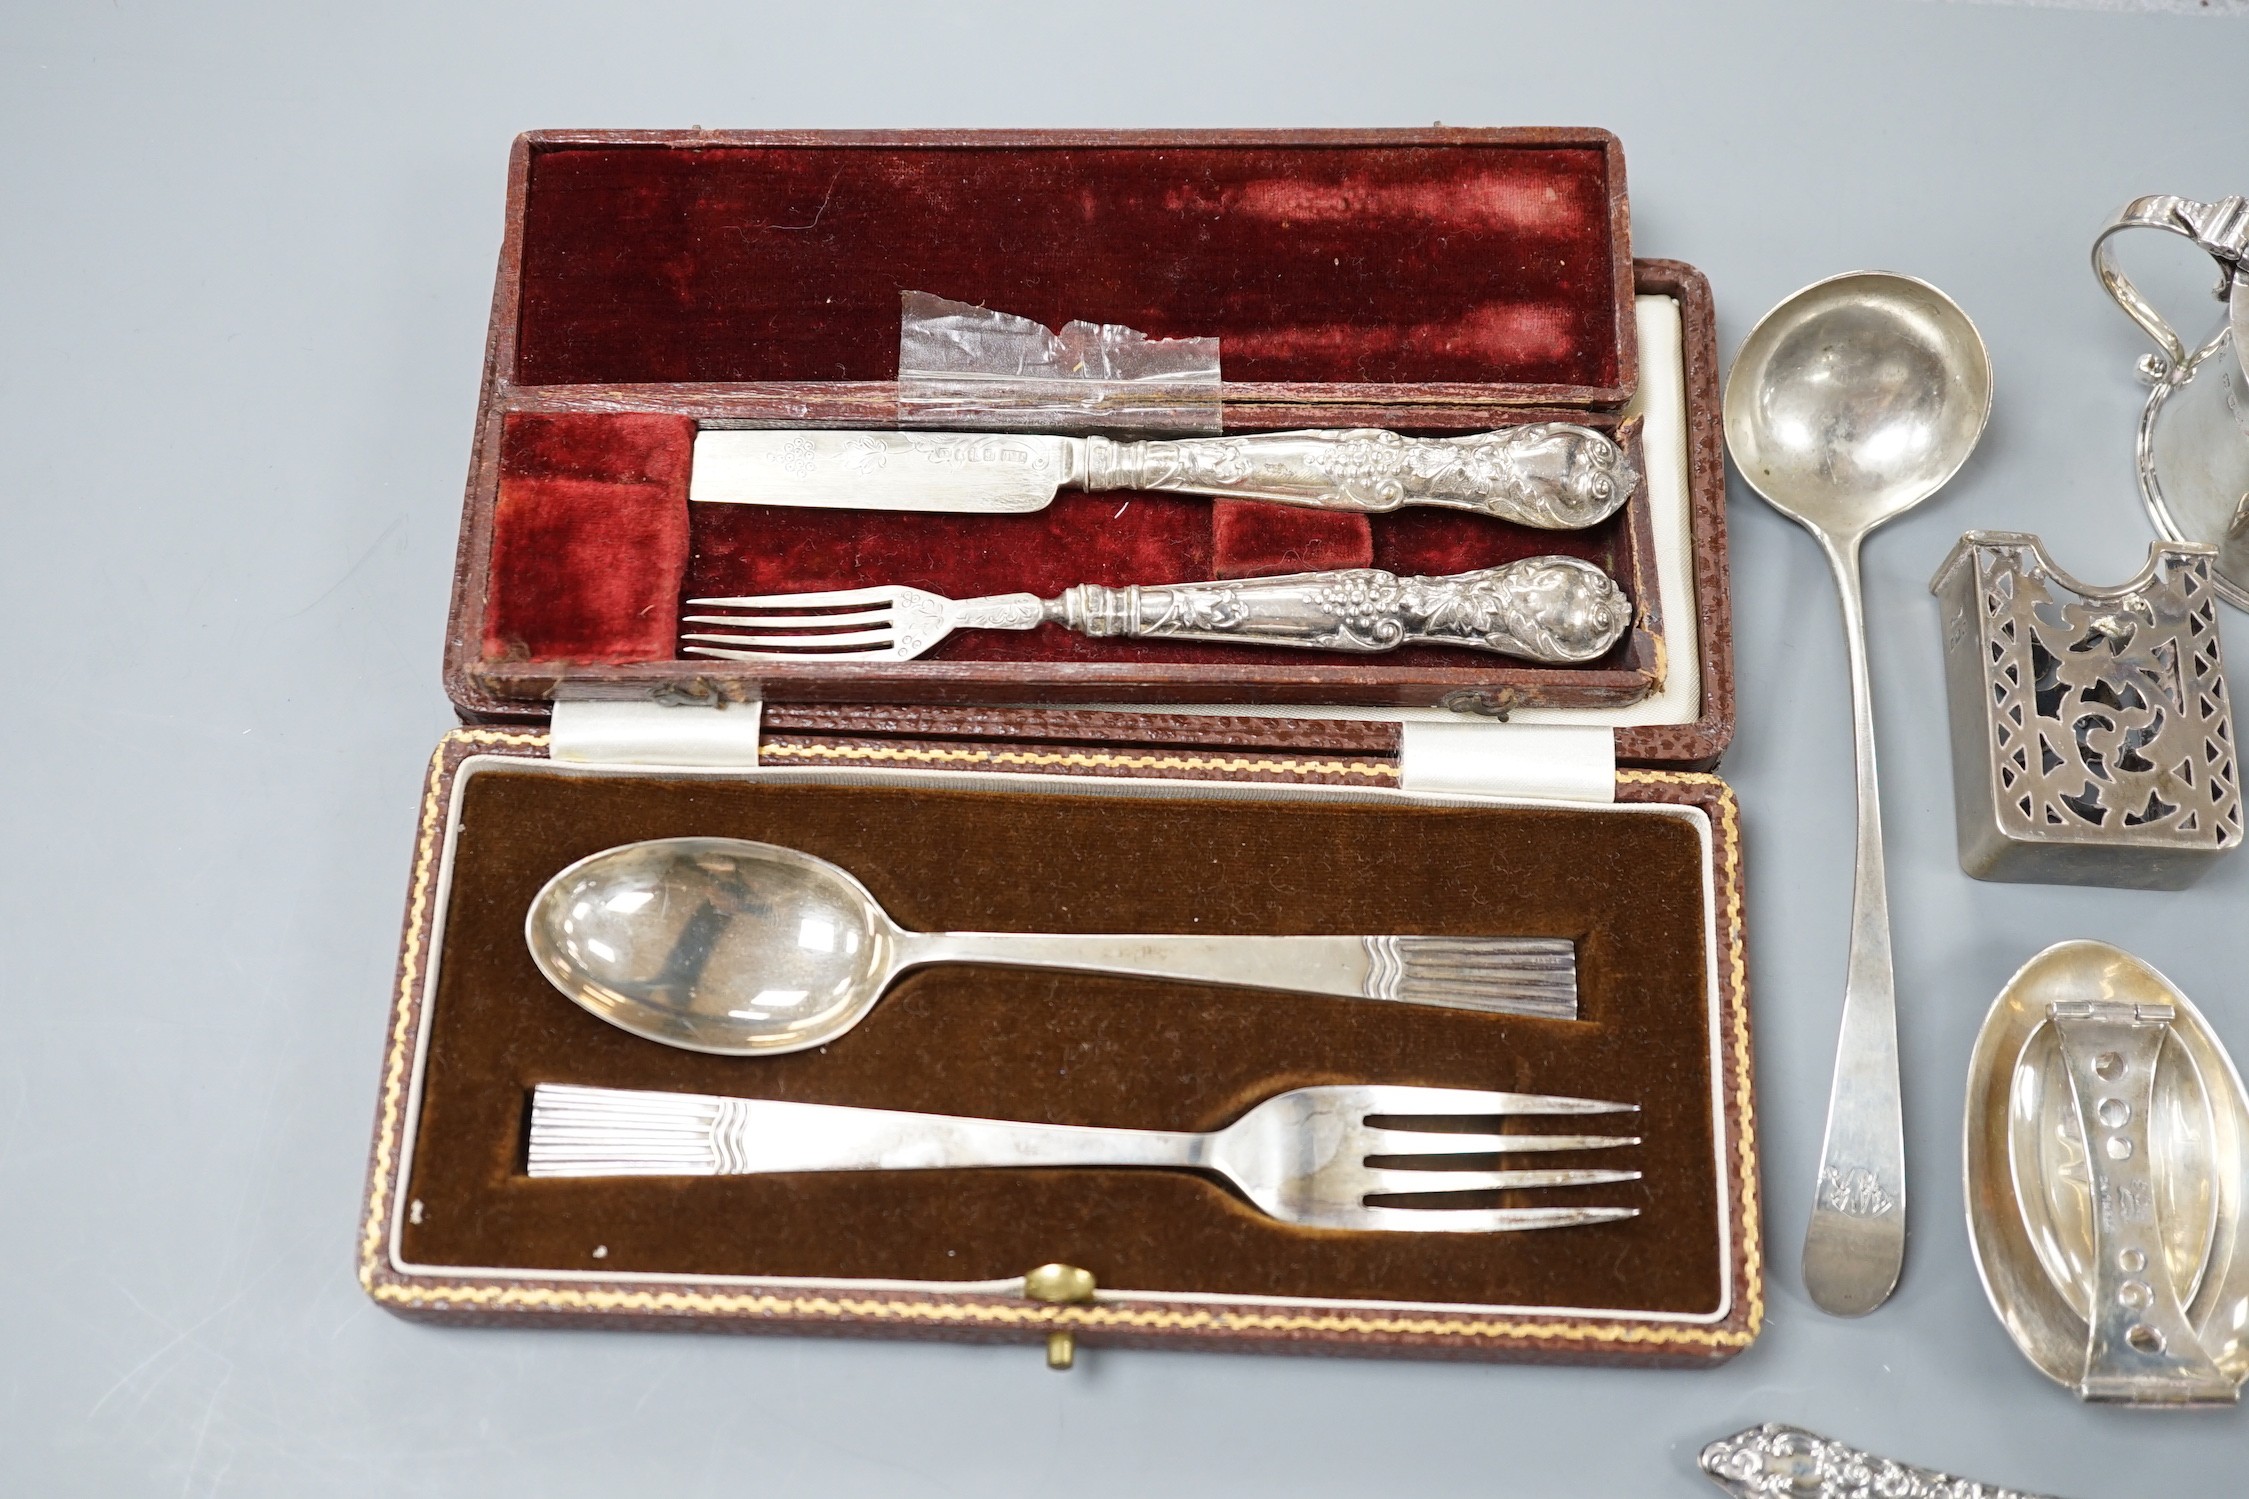 A small collection of sundry silver items including flatware, compact, cigarette case, mustard pot, sterling folding spoon, match sleeve, book mark, cased spoon and fork and a cased Victorian spoon and fork.